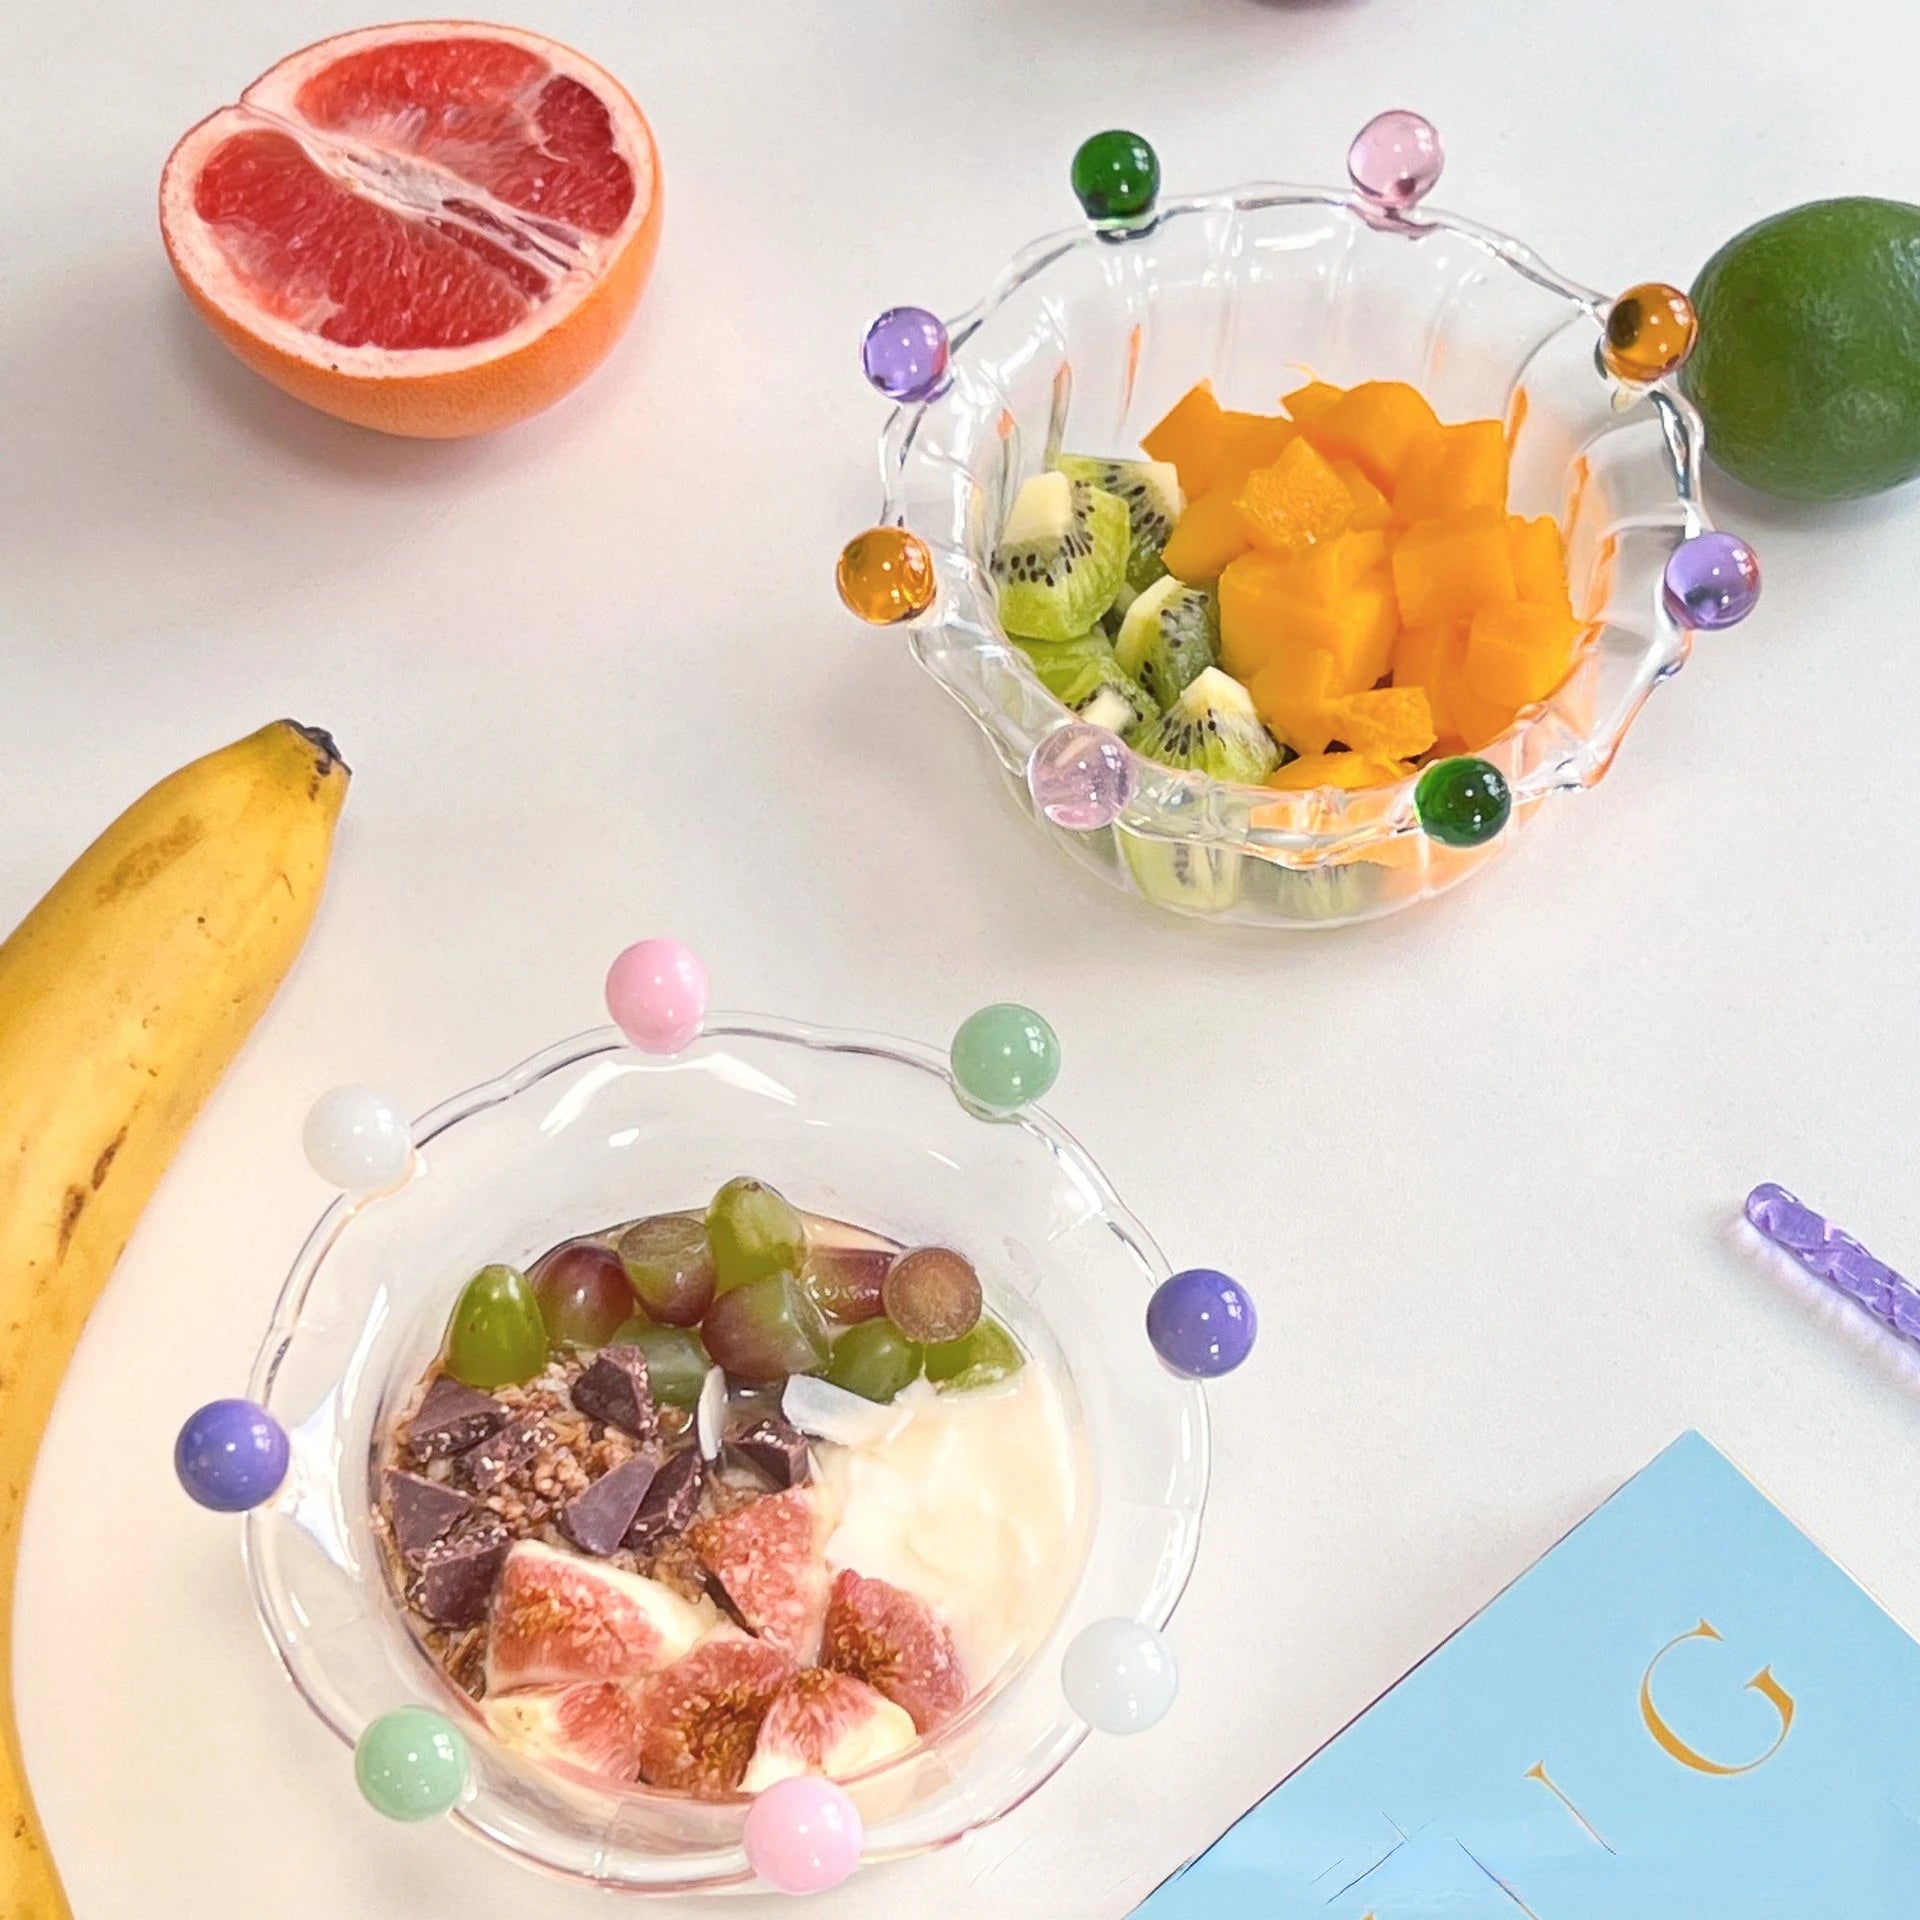 Colourful Crown Shaped Dessert Bowl - The House Of BLOC